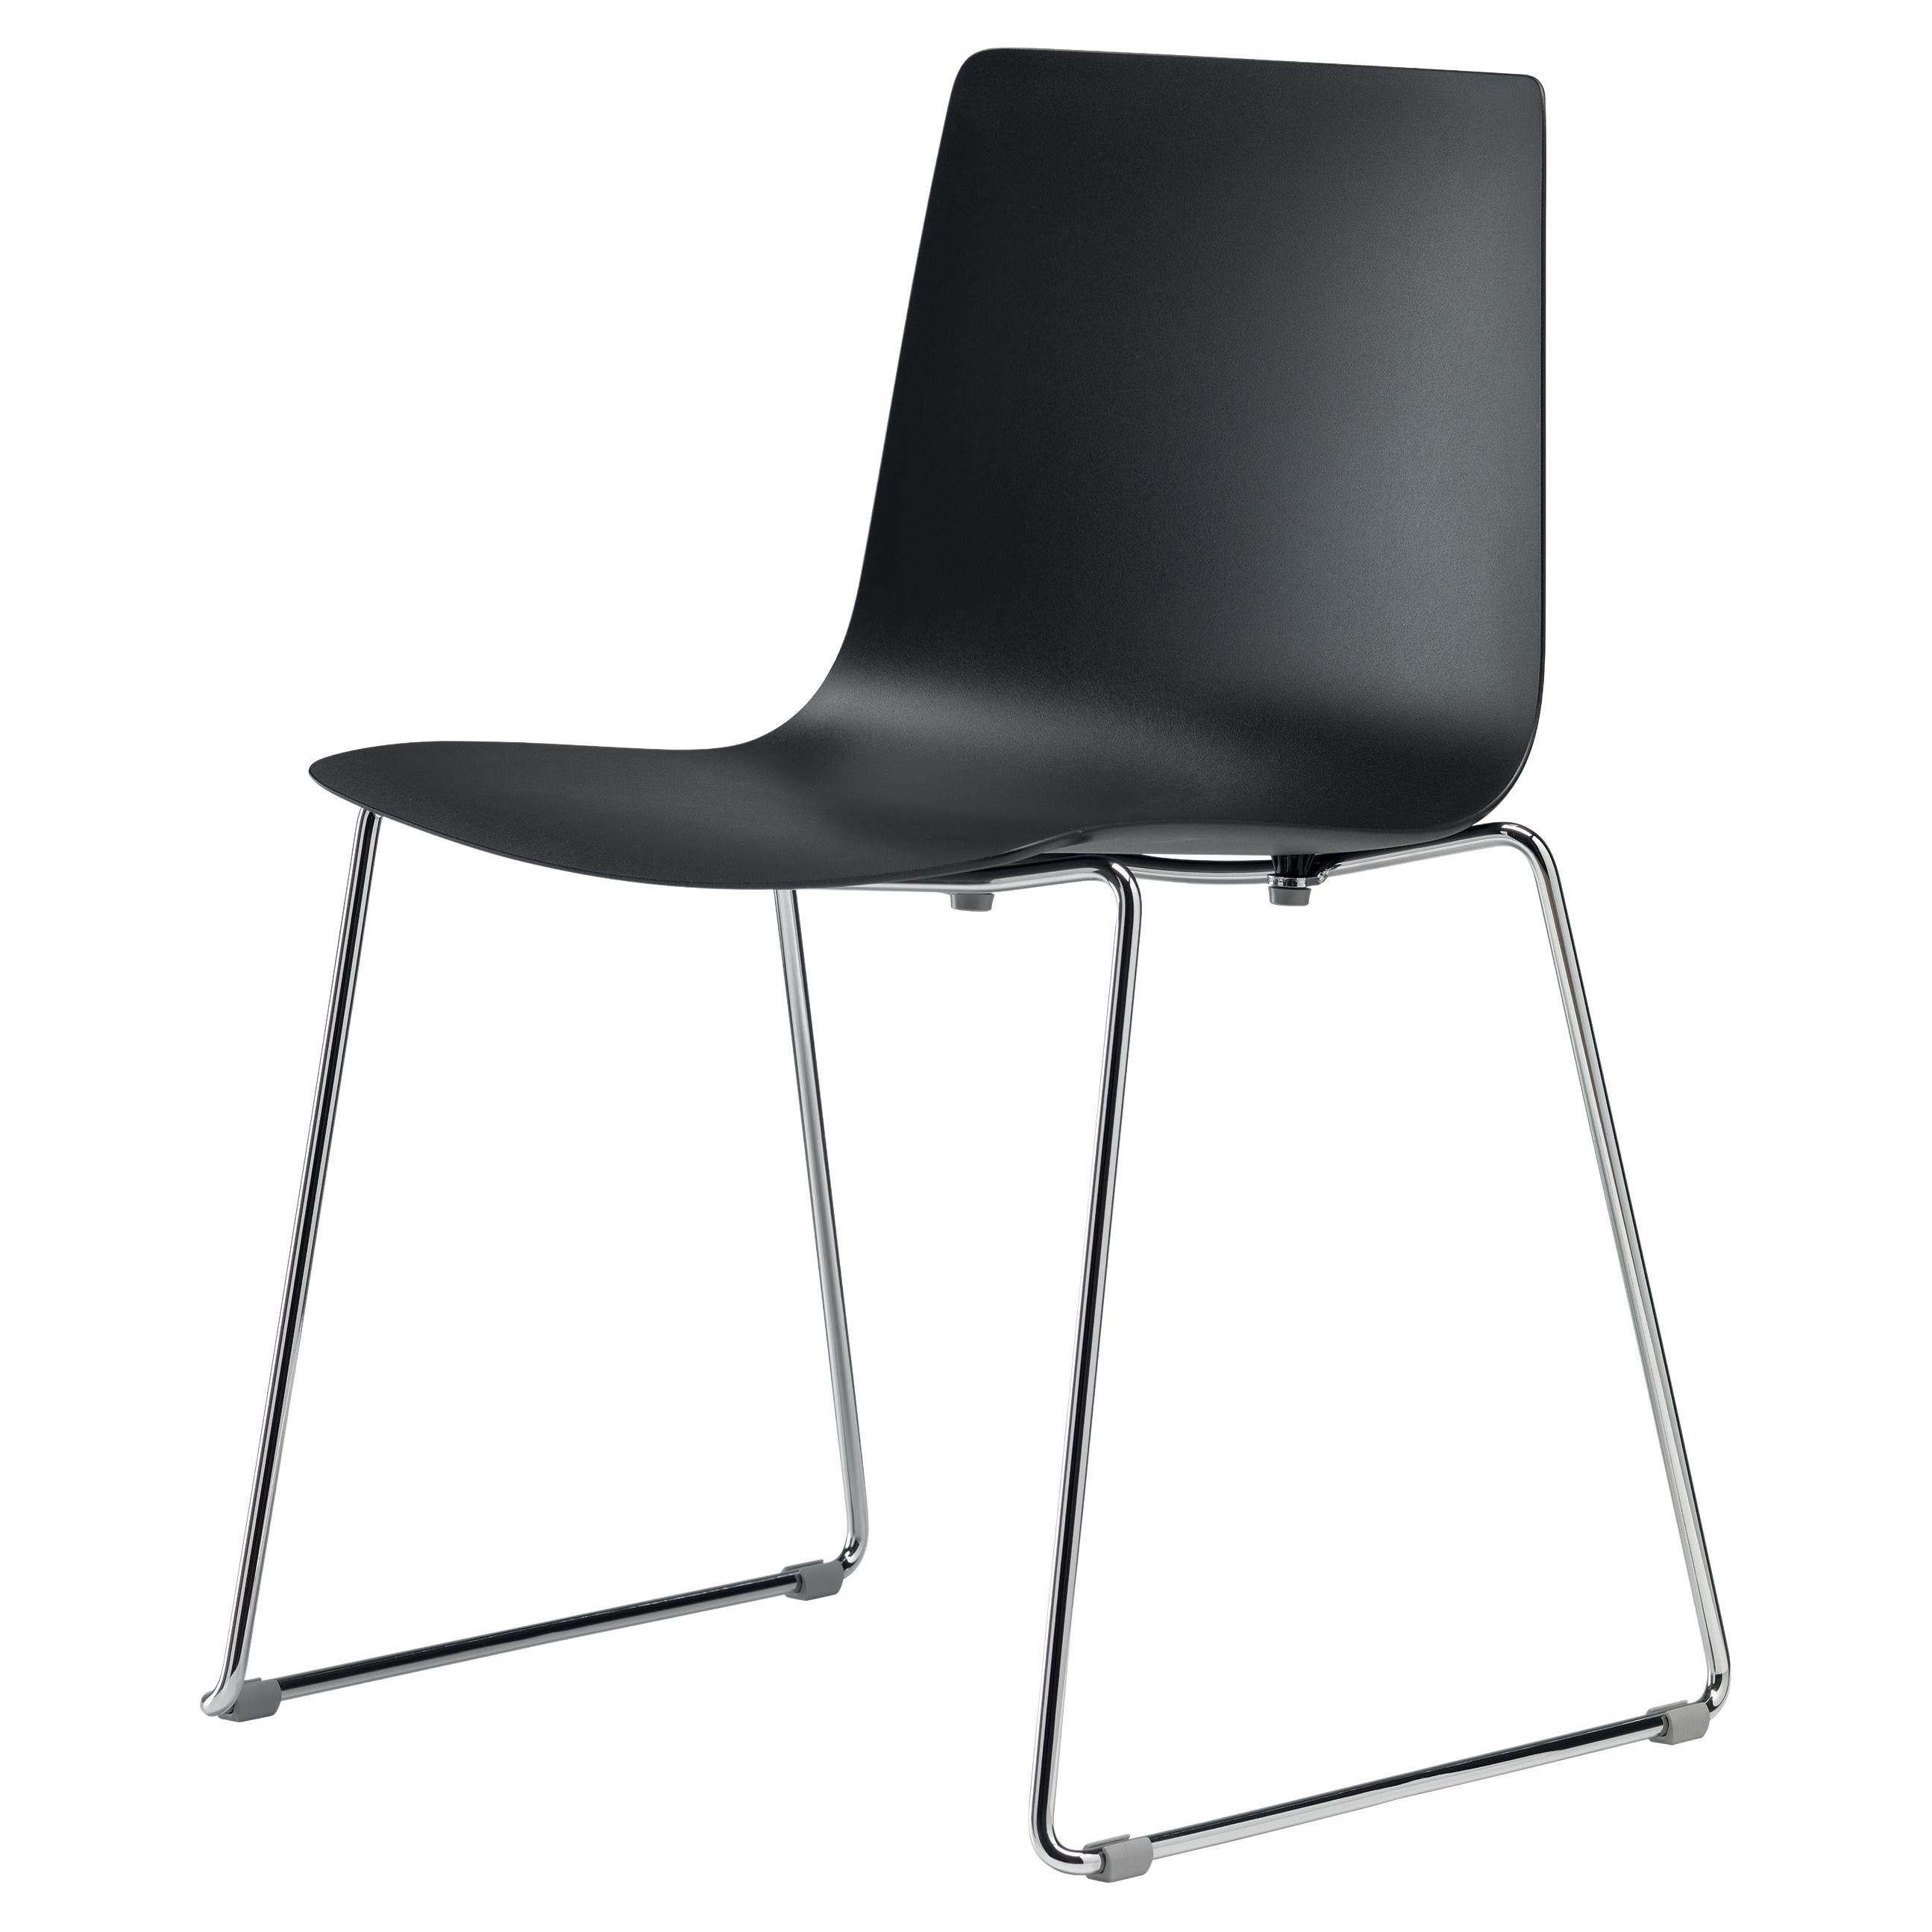 Alias 89A Slim Chair Sledge in Black Polypropylene Seat with Chromed Steel Frame For Sale